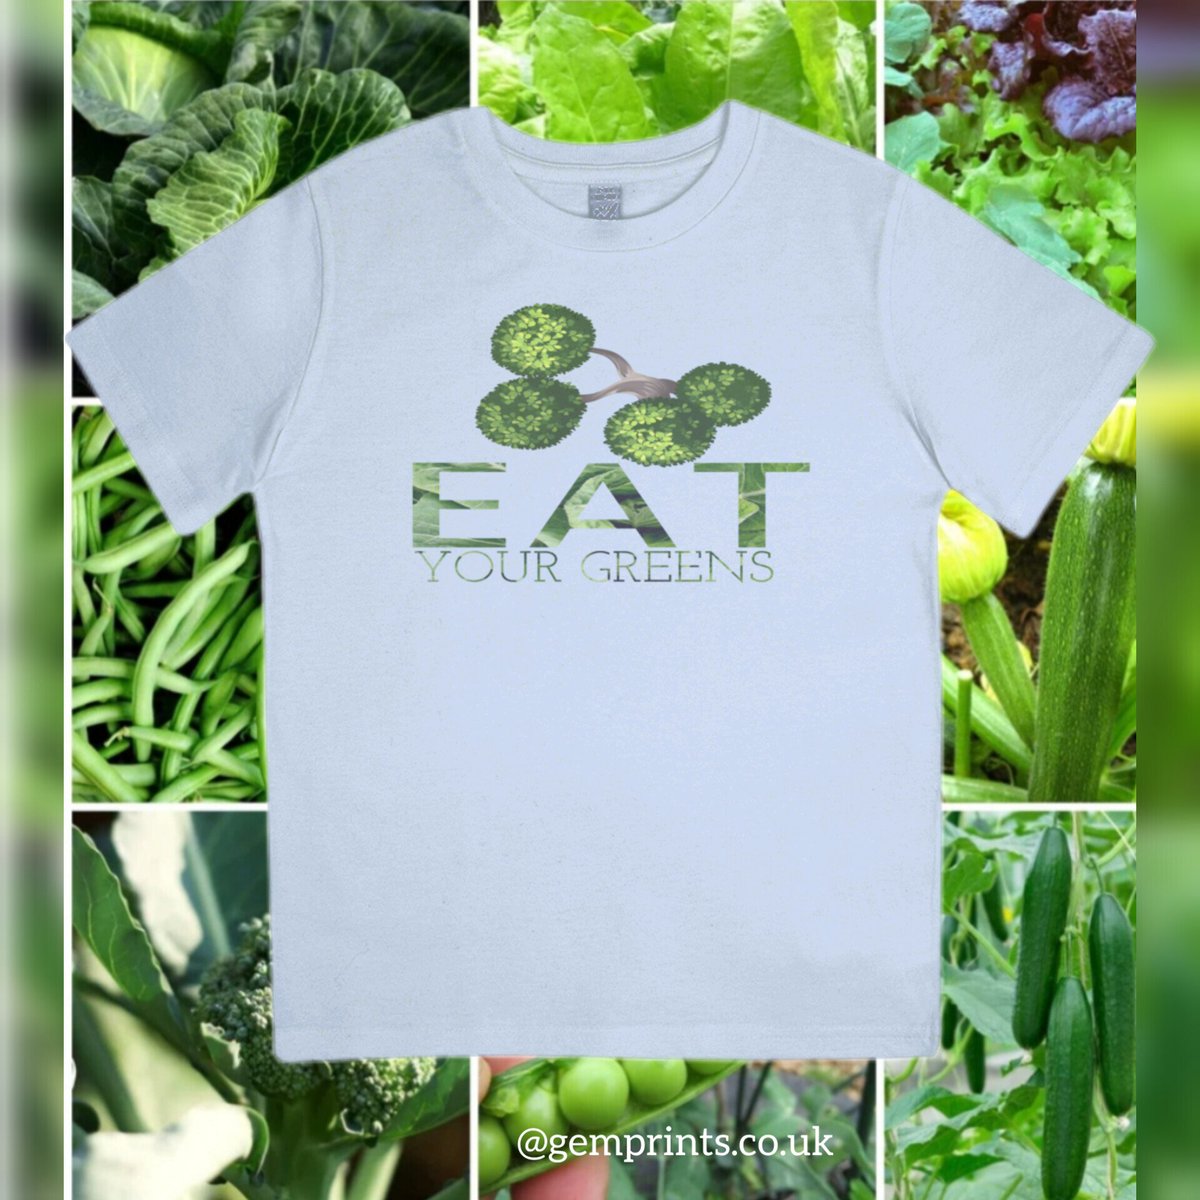 Classy 100% Organic T-Shirt for Children #organictshirts #eatyourgreens #healthcare4all #healthy #healthylifestyle #childrenfashion  gemprints.co.uk/index.php/prod…